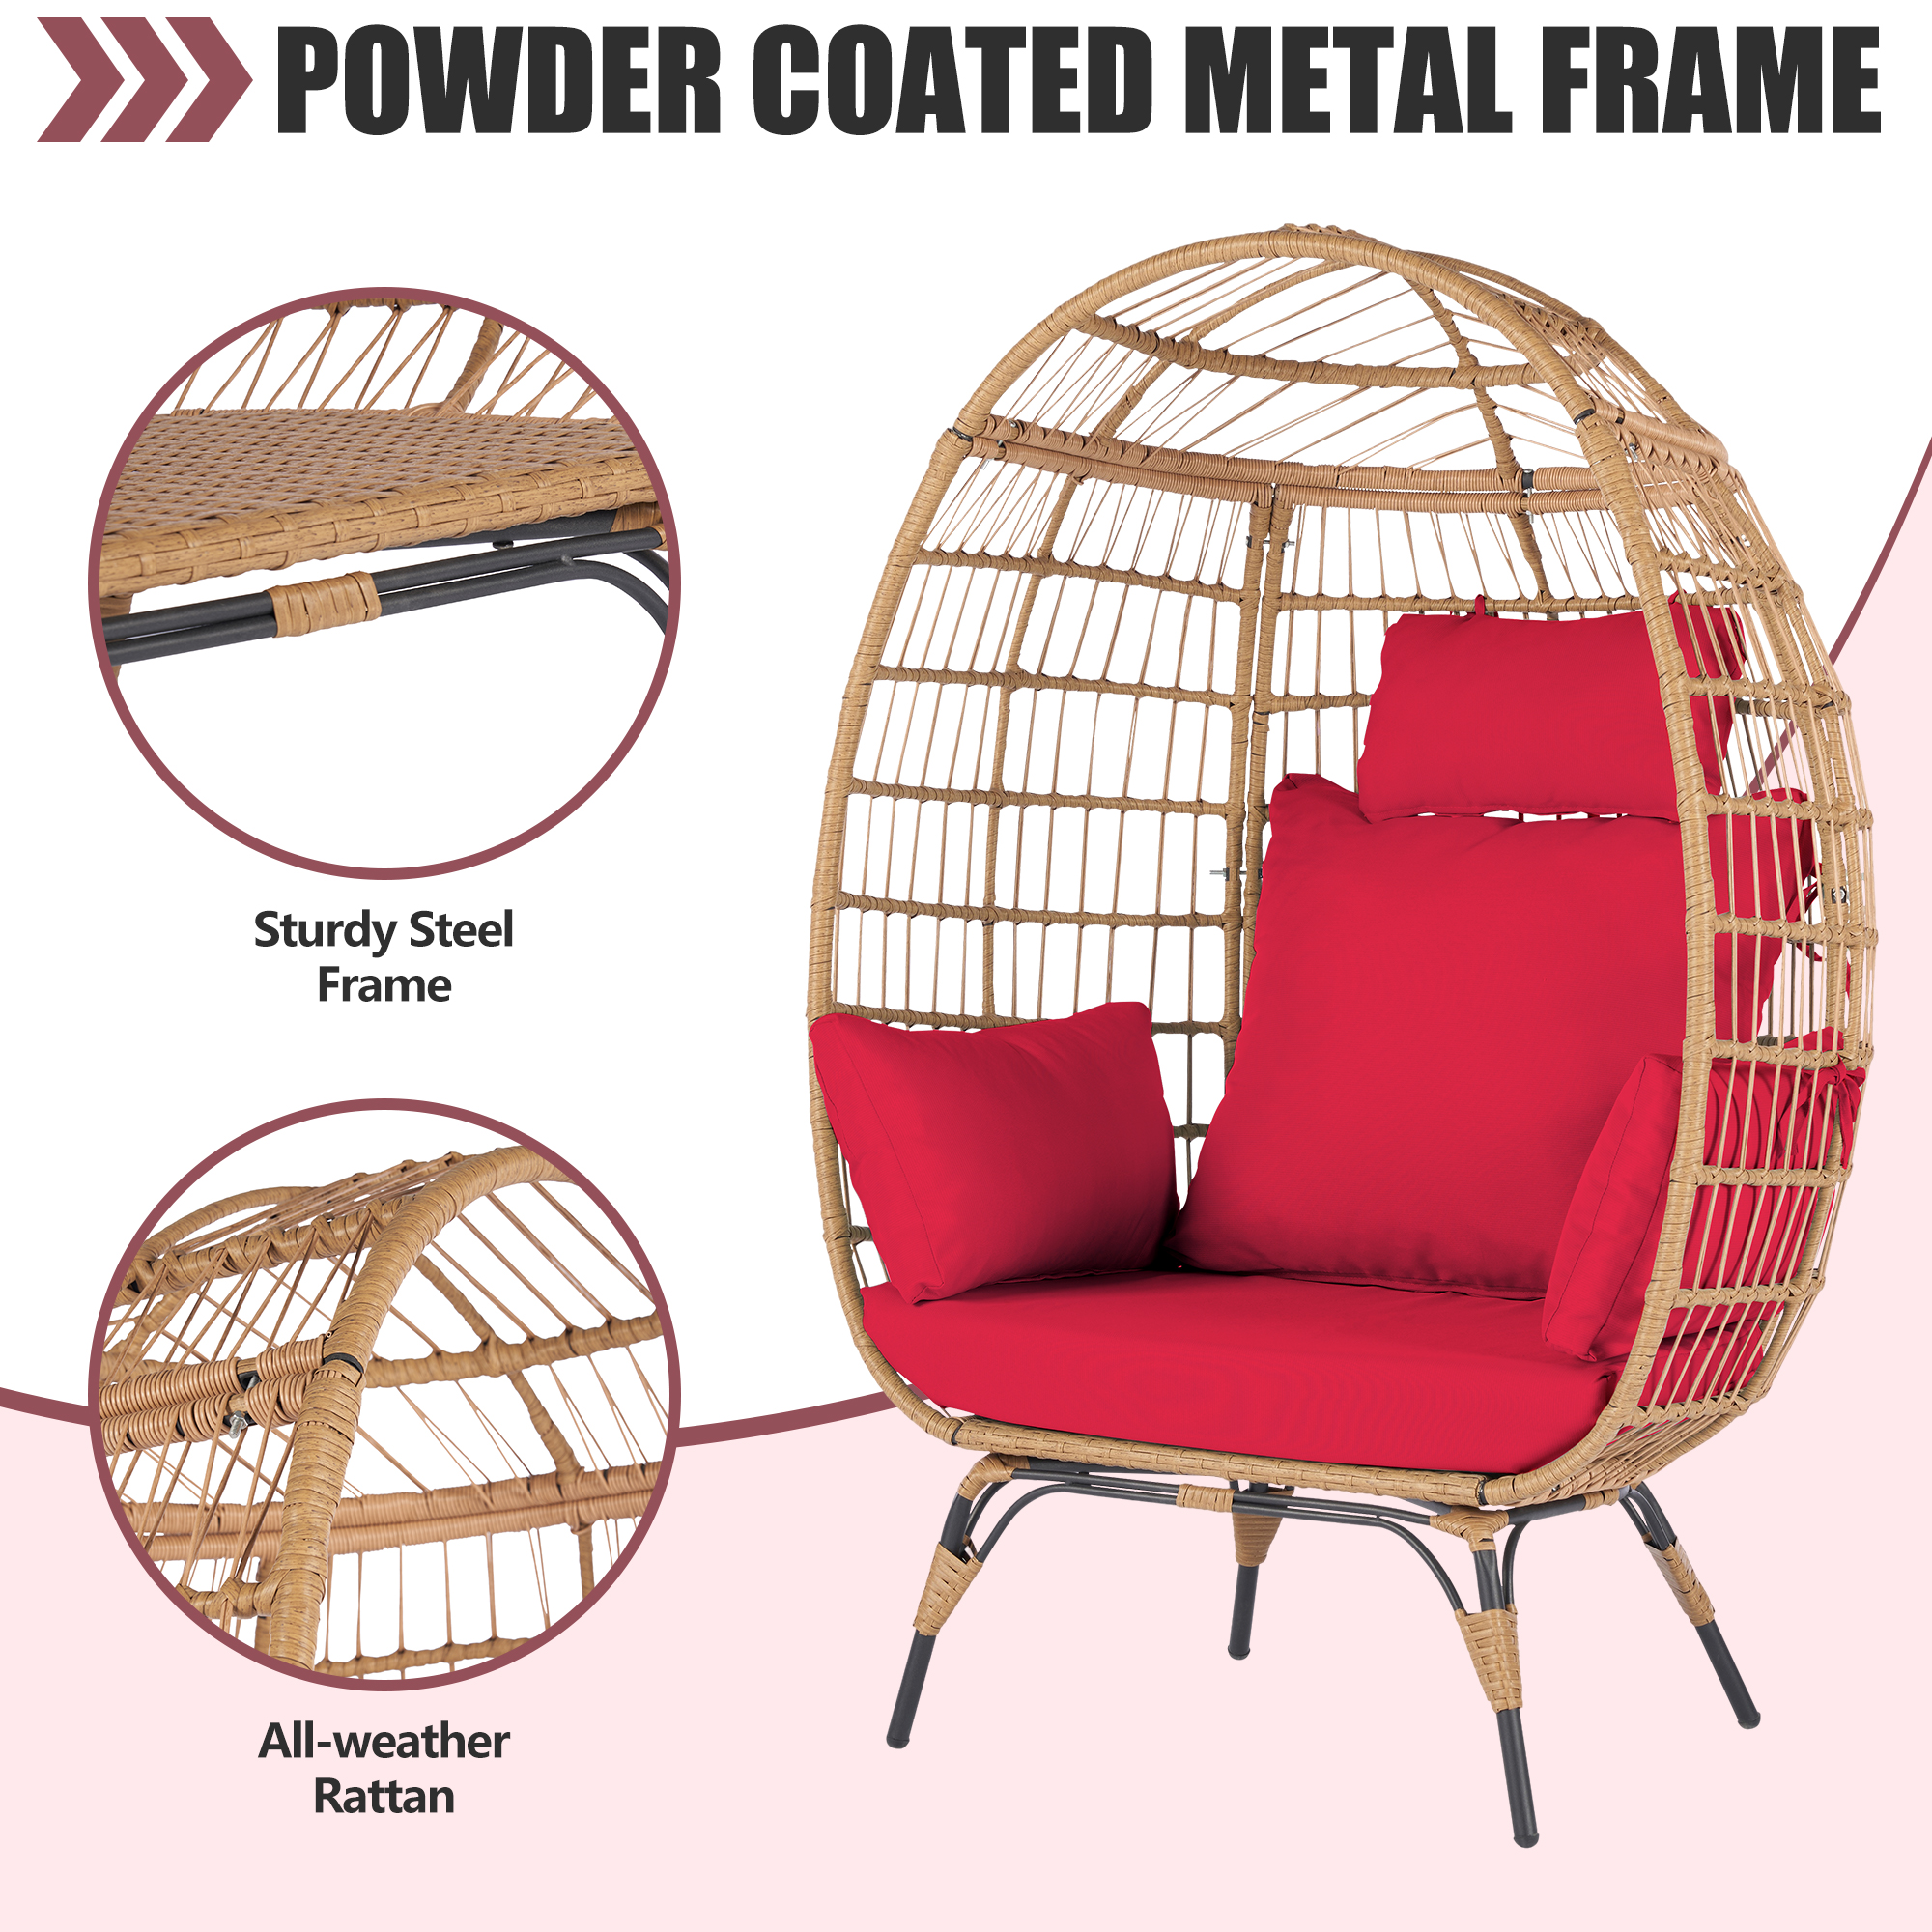 Outdoor Stationary Egg Chair, Wicker Egg Swing Chair with Red Cushions for Patio, Garden, Backyard, Rattan Standing Egg Chair - image 5 of 10